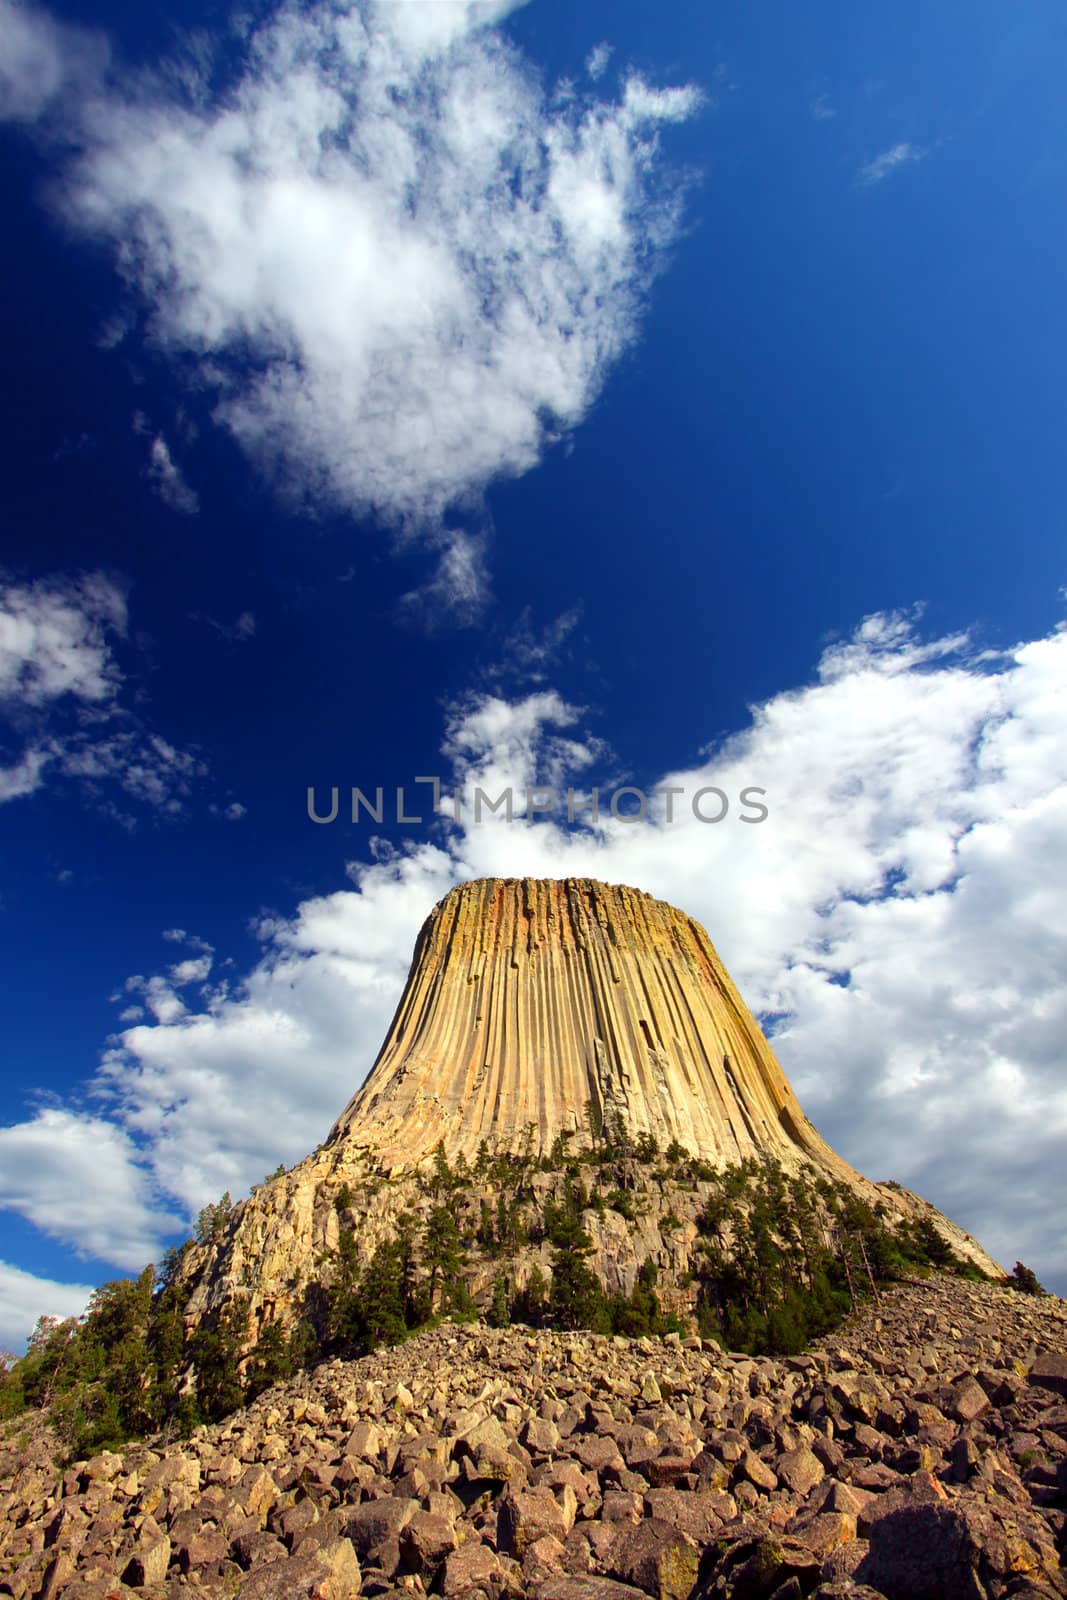 Devils Tower National Monument rises into the big skies of Wyoming.